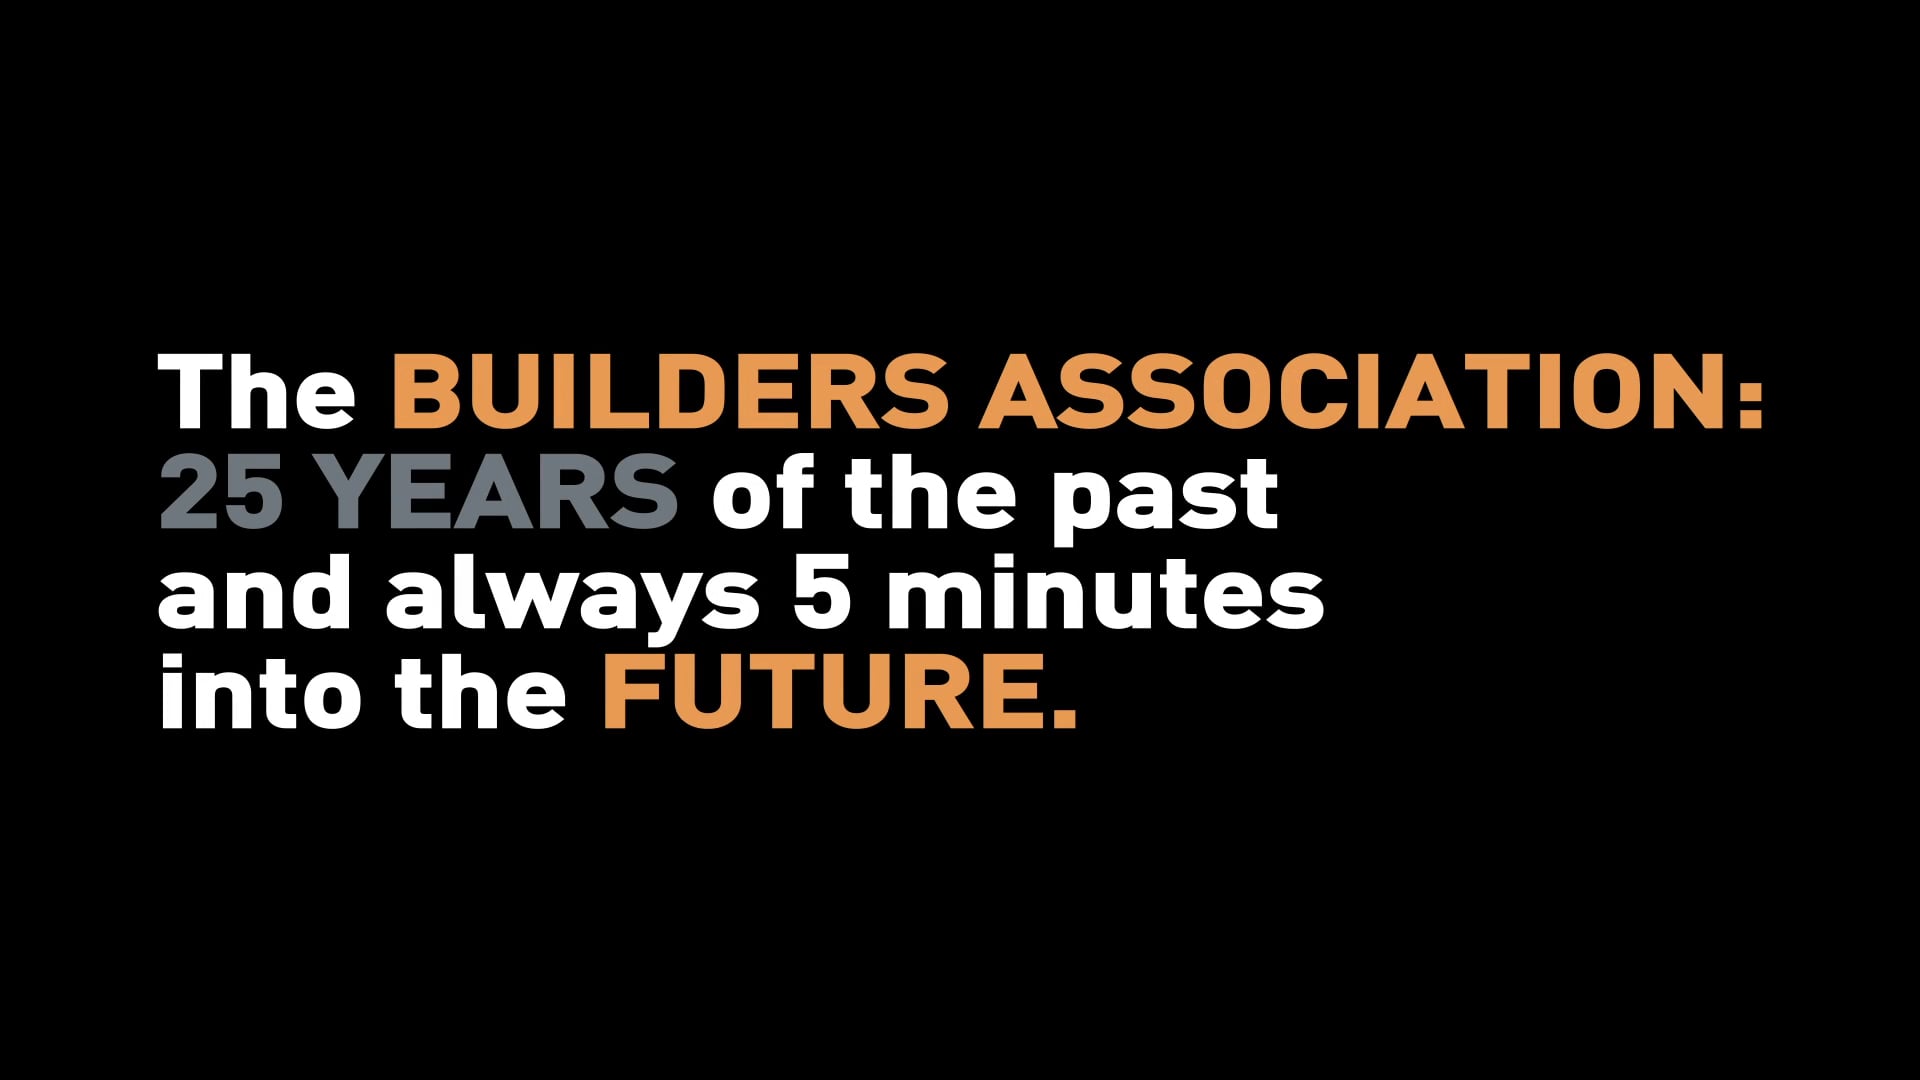 The Builders Association turns 25